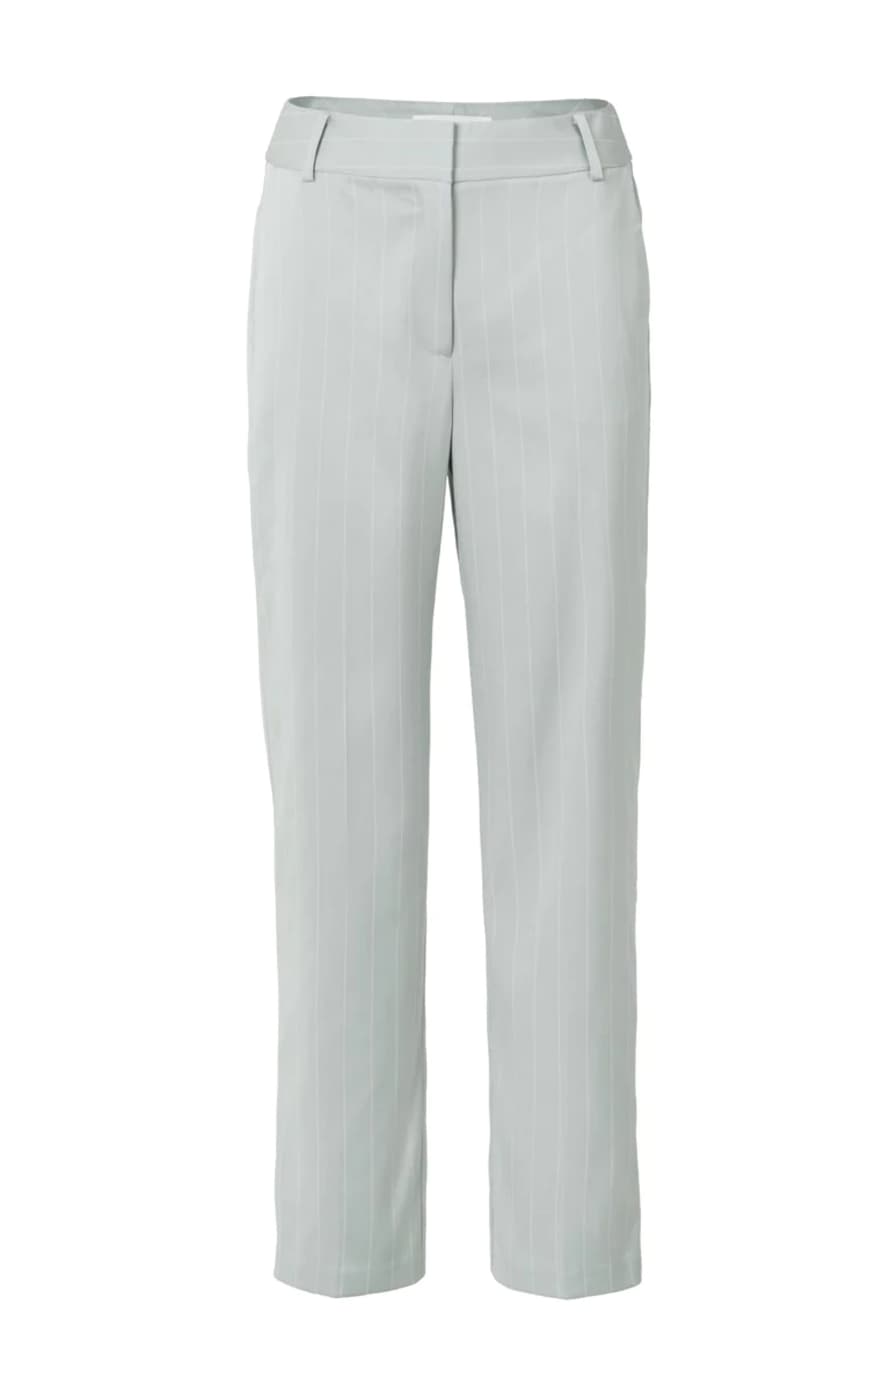 Yaya Northern Droplet Grey Dessin Loose Fit Trouser with Stripe